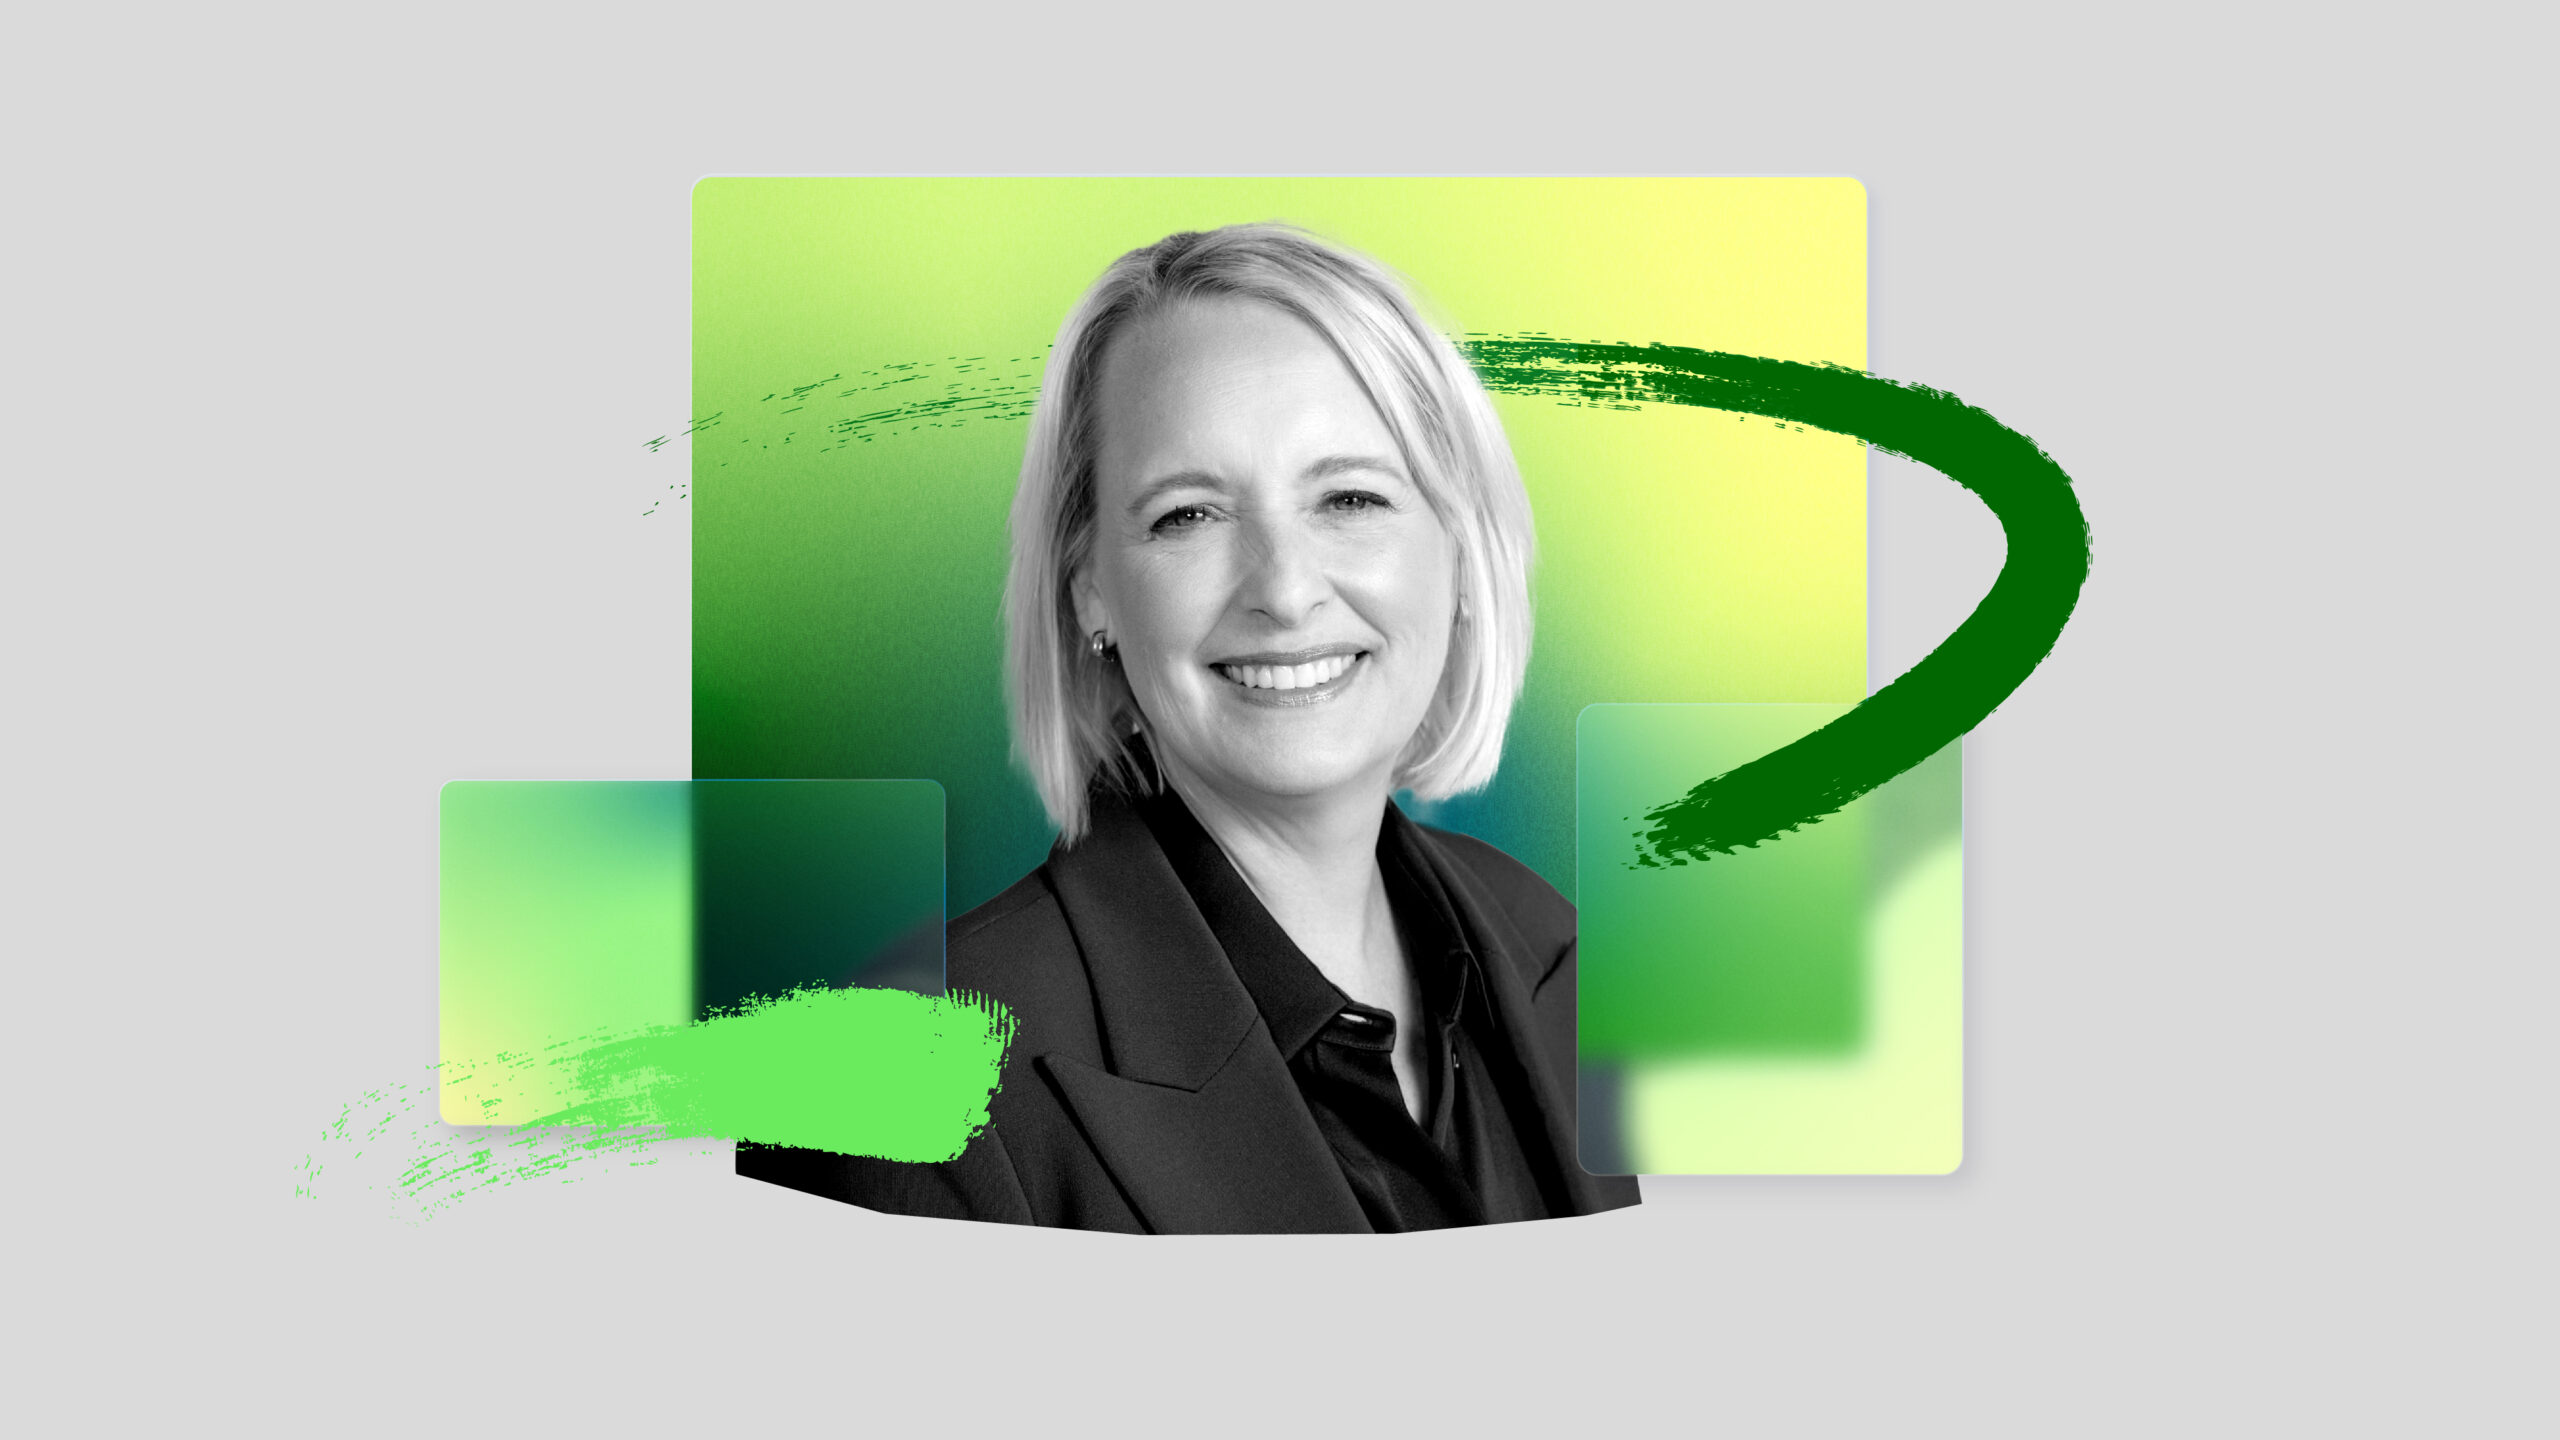 A colorful photo-illustration of Julie Sweet, chair and CEO of Accenture 